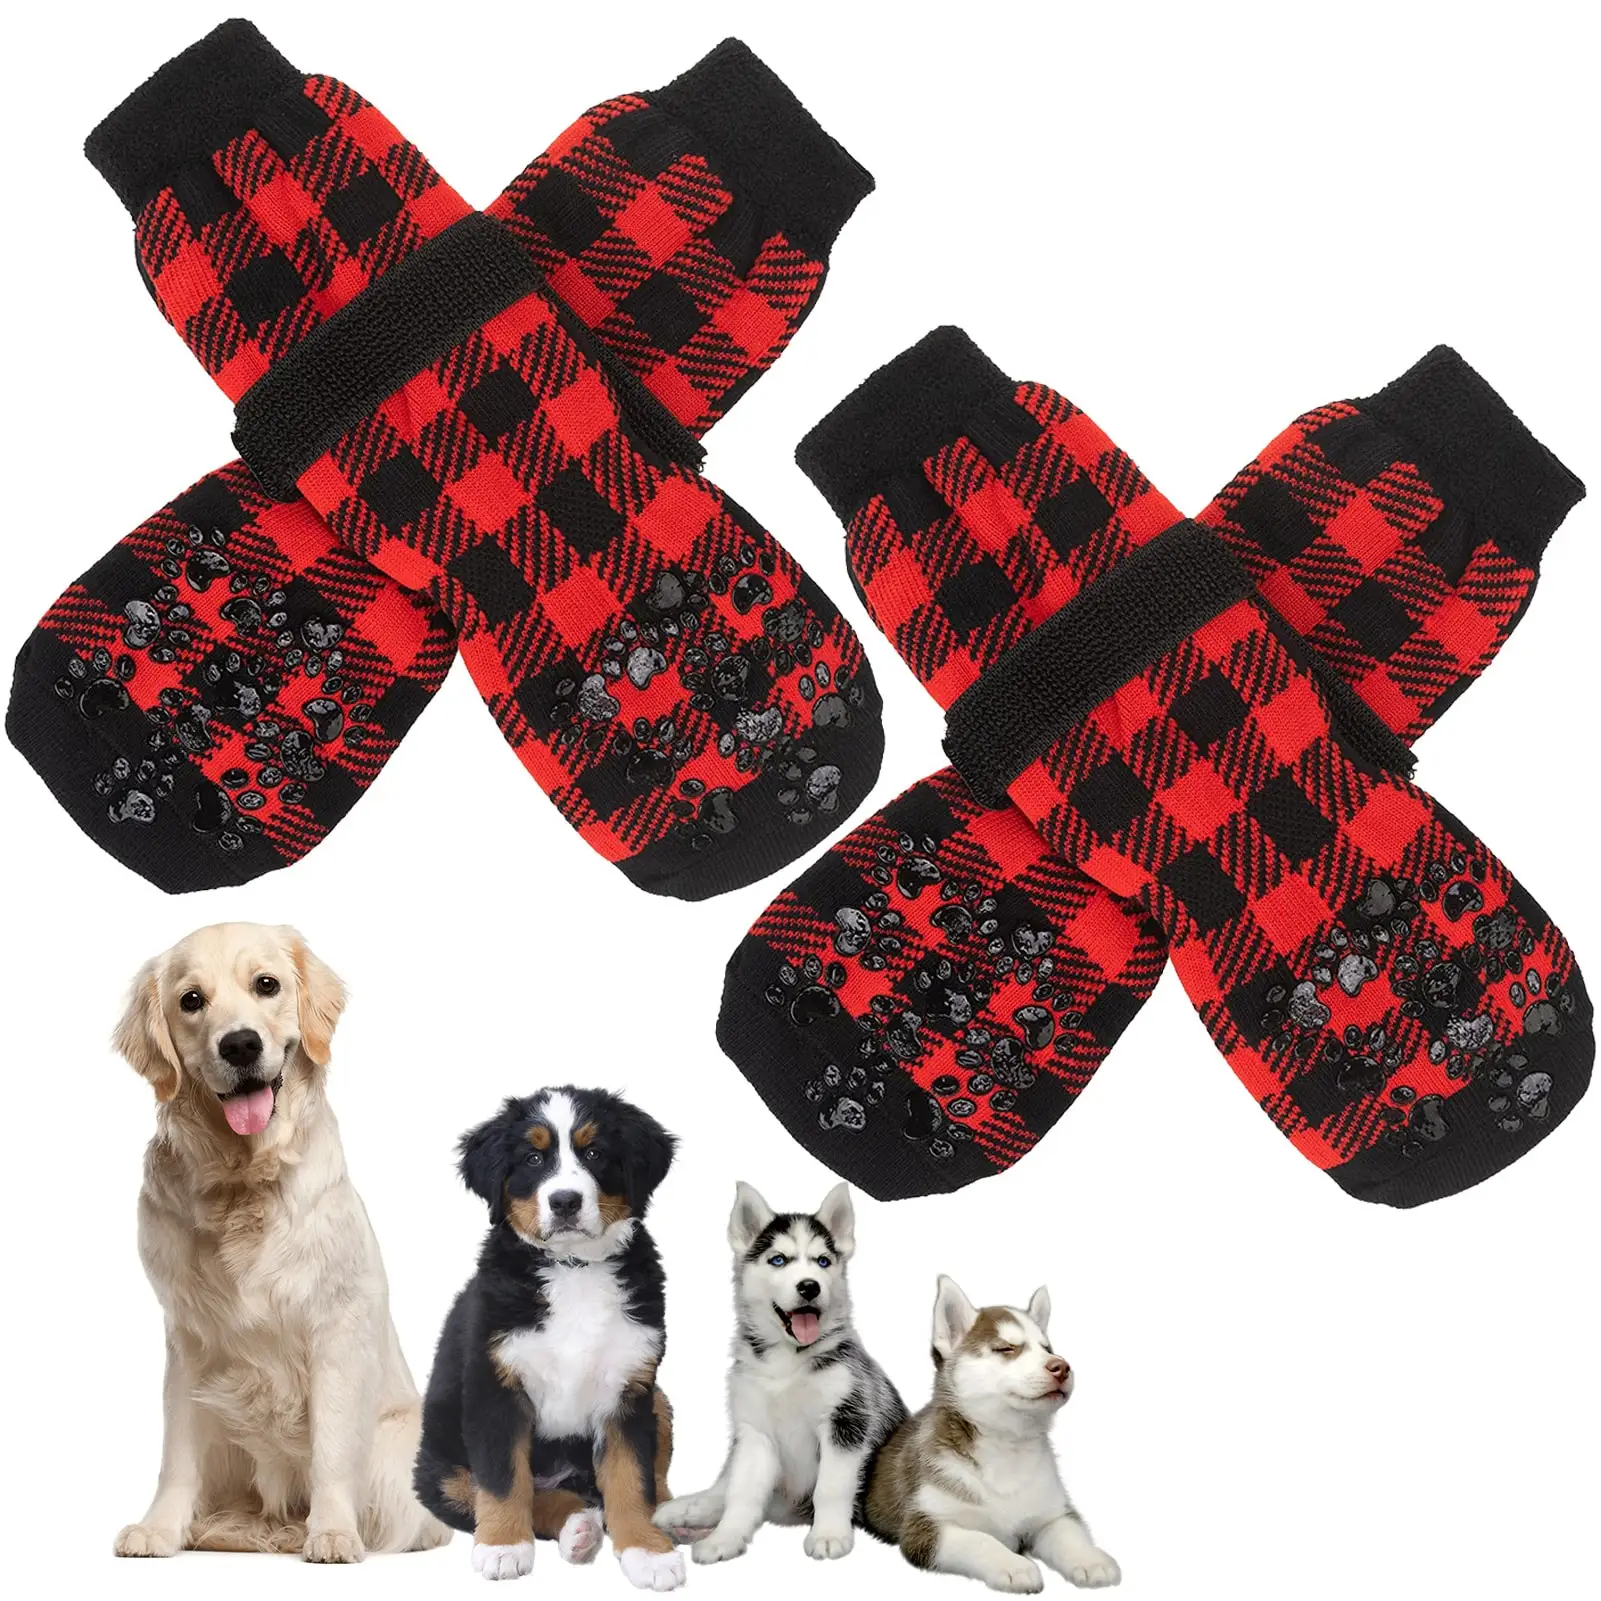 

Anti Slip Dog Socks Toe Grips For Dogs Dog Booties For Medium Dogs Dog Paw Protector For Indoor Hardwood Floors Prevent Licking